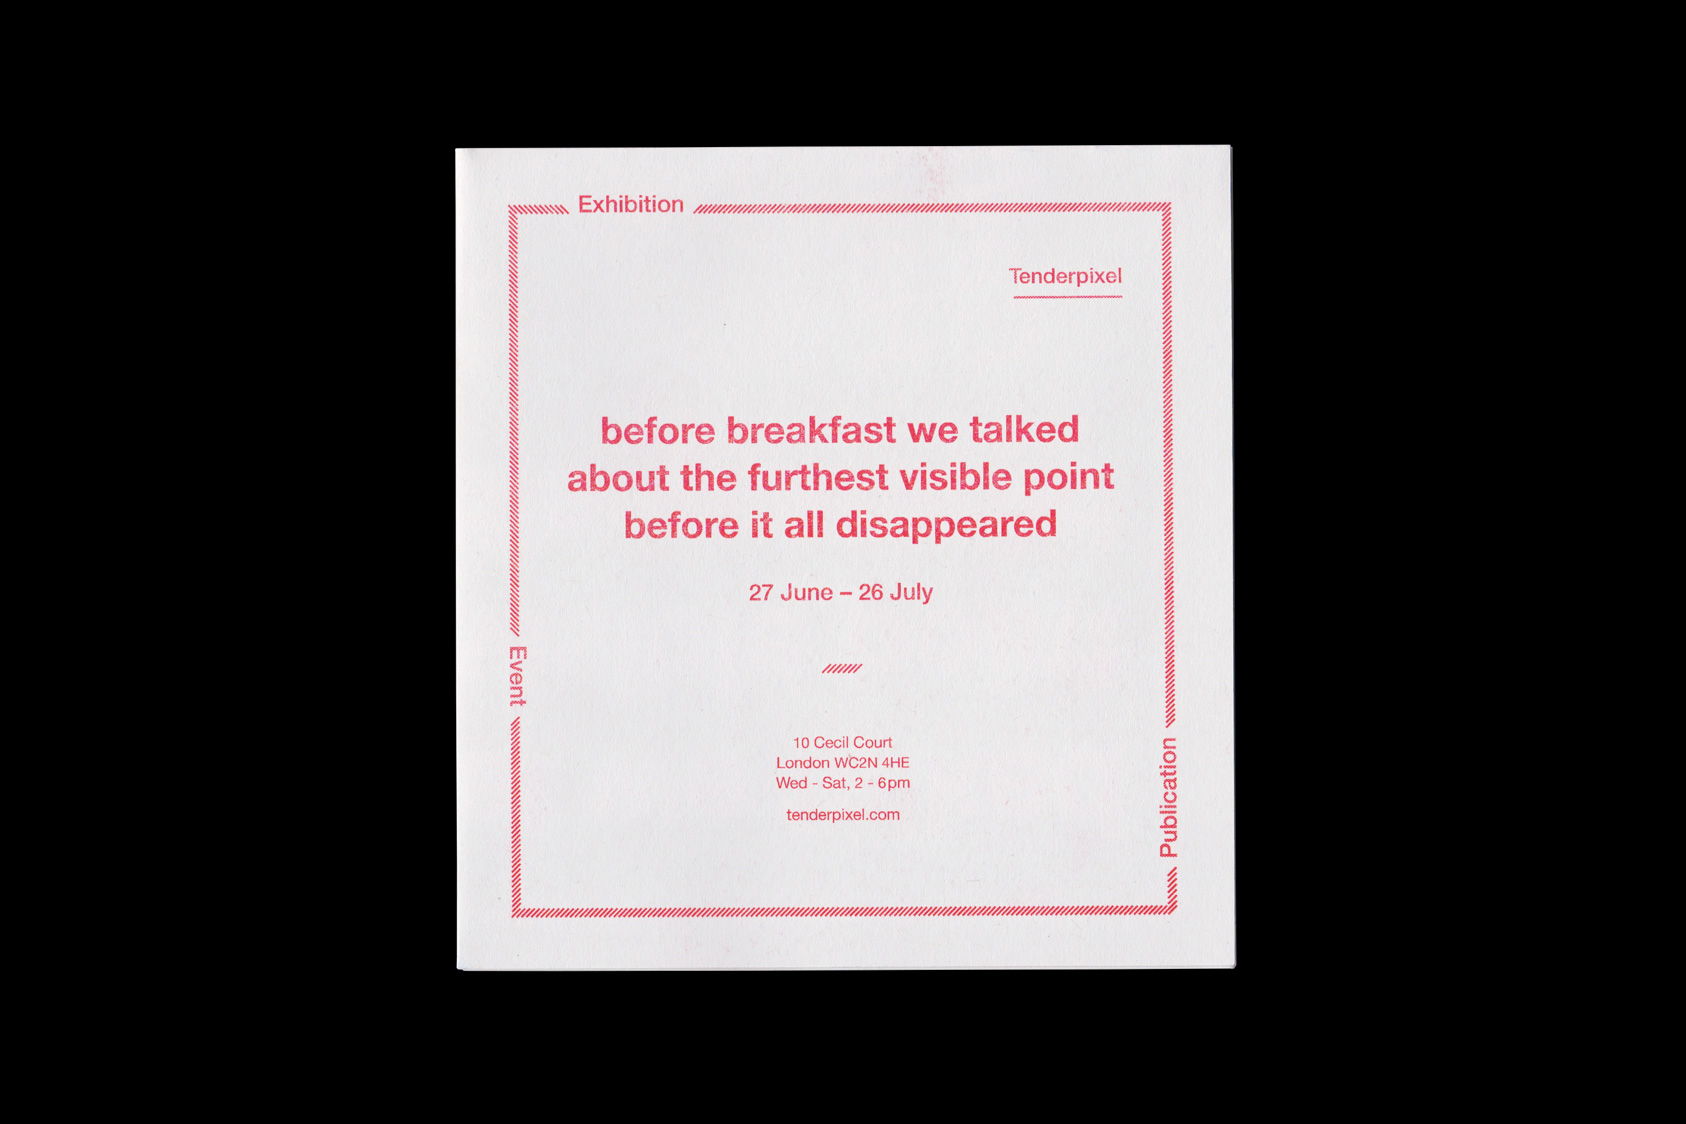 Before Breakfast We Talked About the Furthest Visible Point Before it all Disappeared - exhibition handout for Tenderpixel, 2014 by the agency for emerging ideas